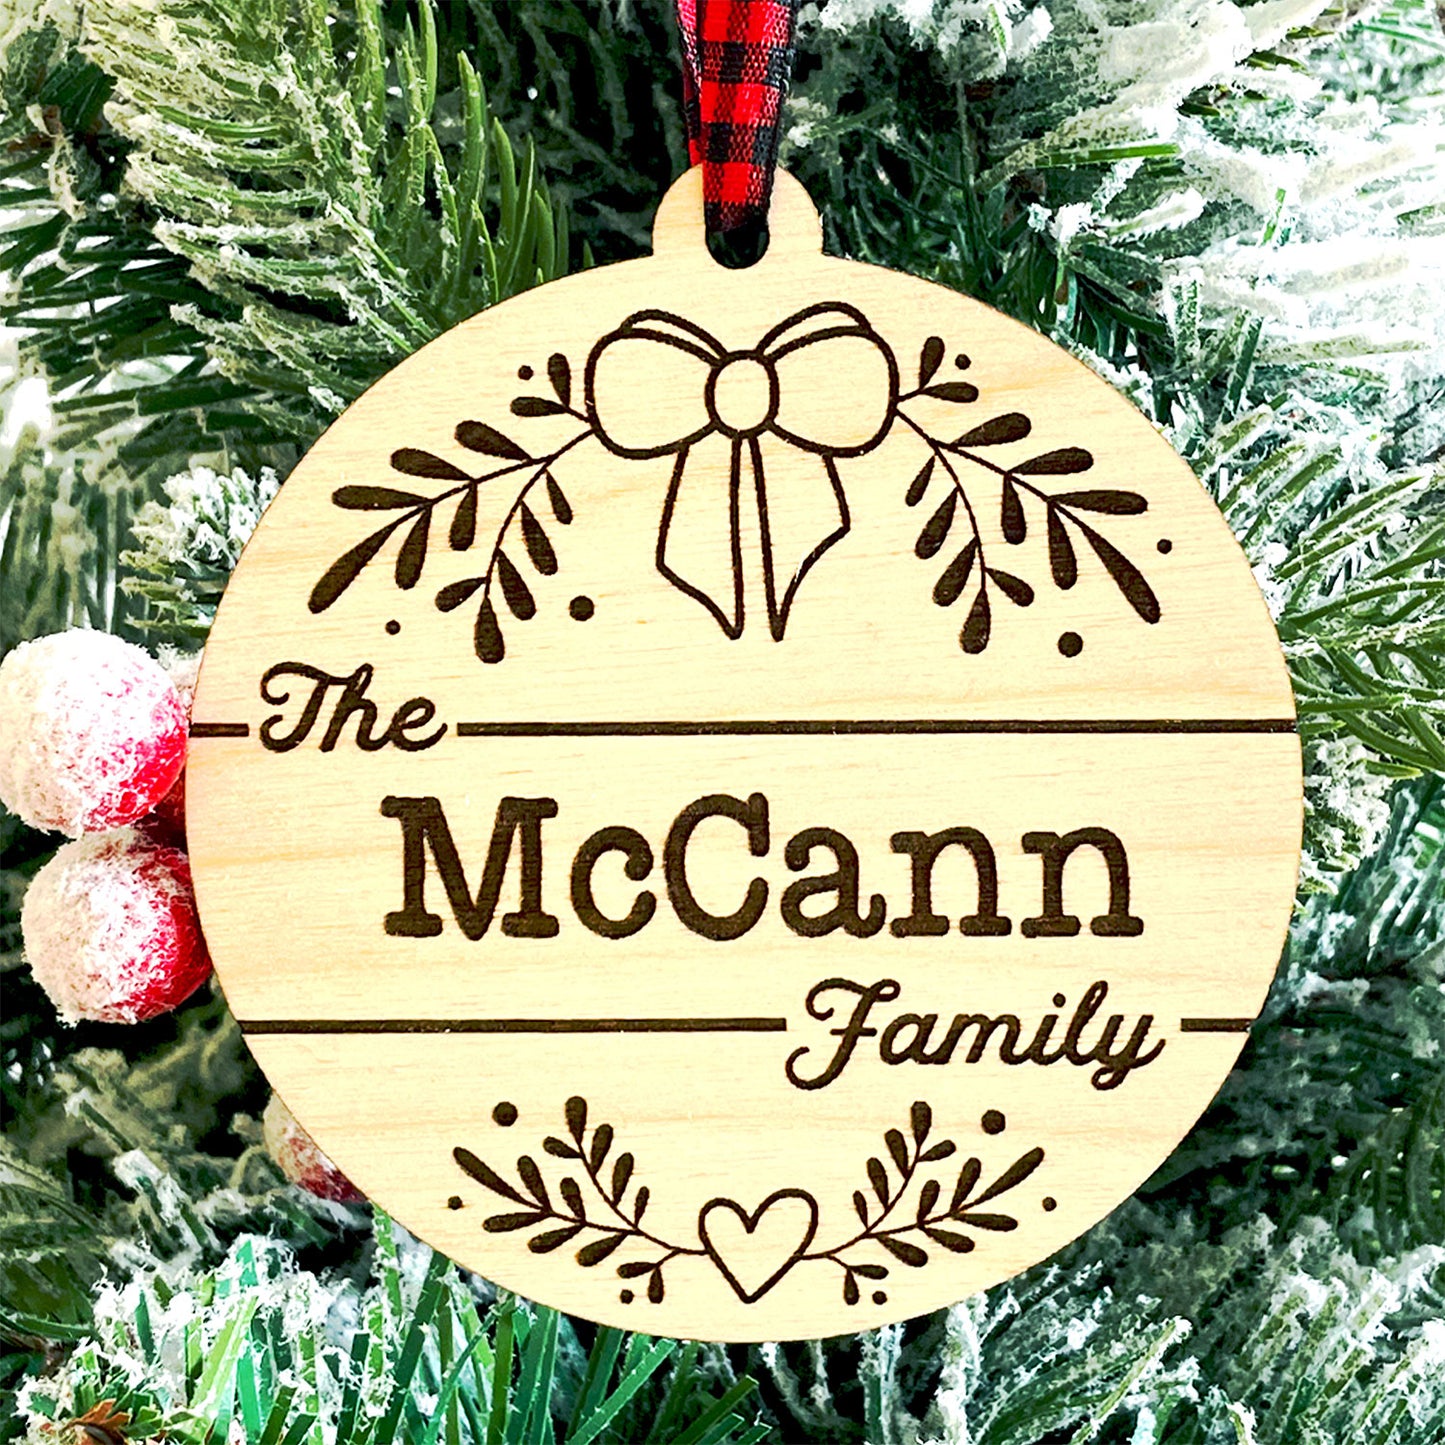 Personalized Christmas Ornament With Bow